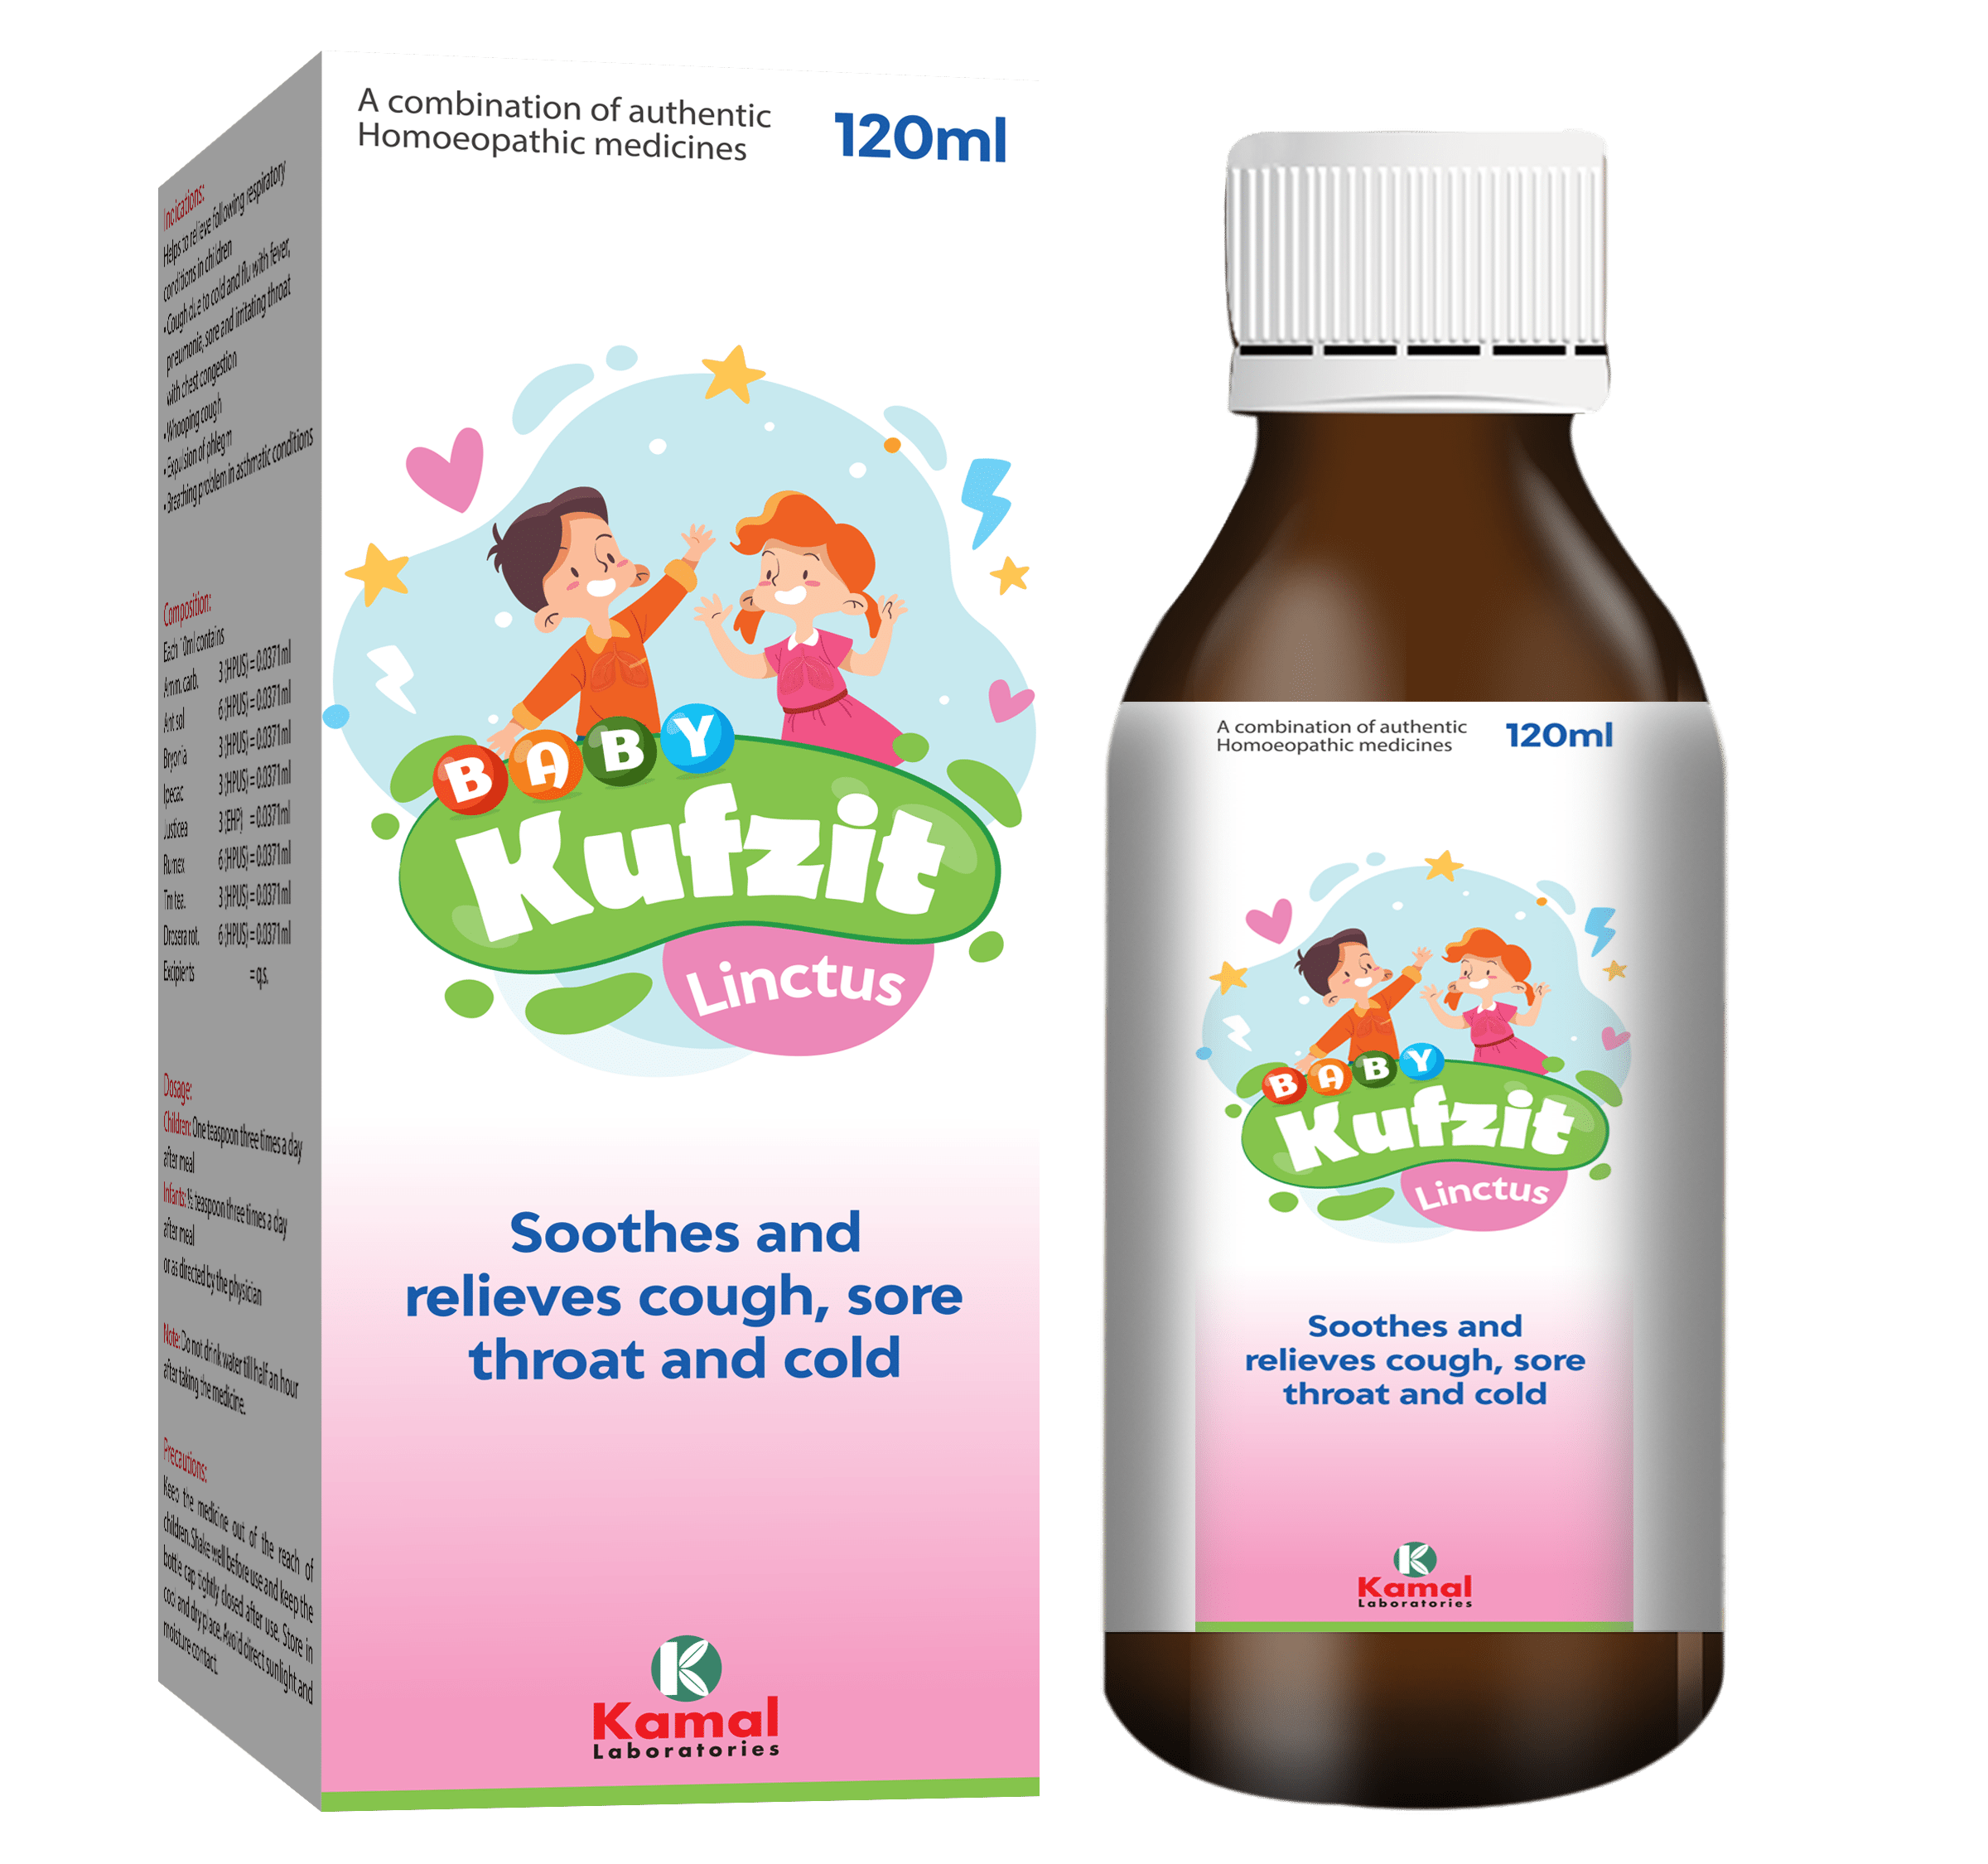 Baby Kufzit Linctus Soothes and relieves cough, sore throat and cold